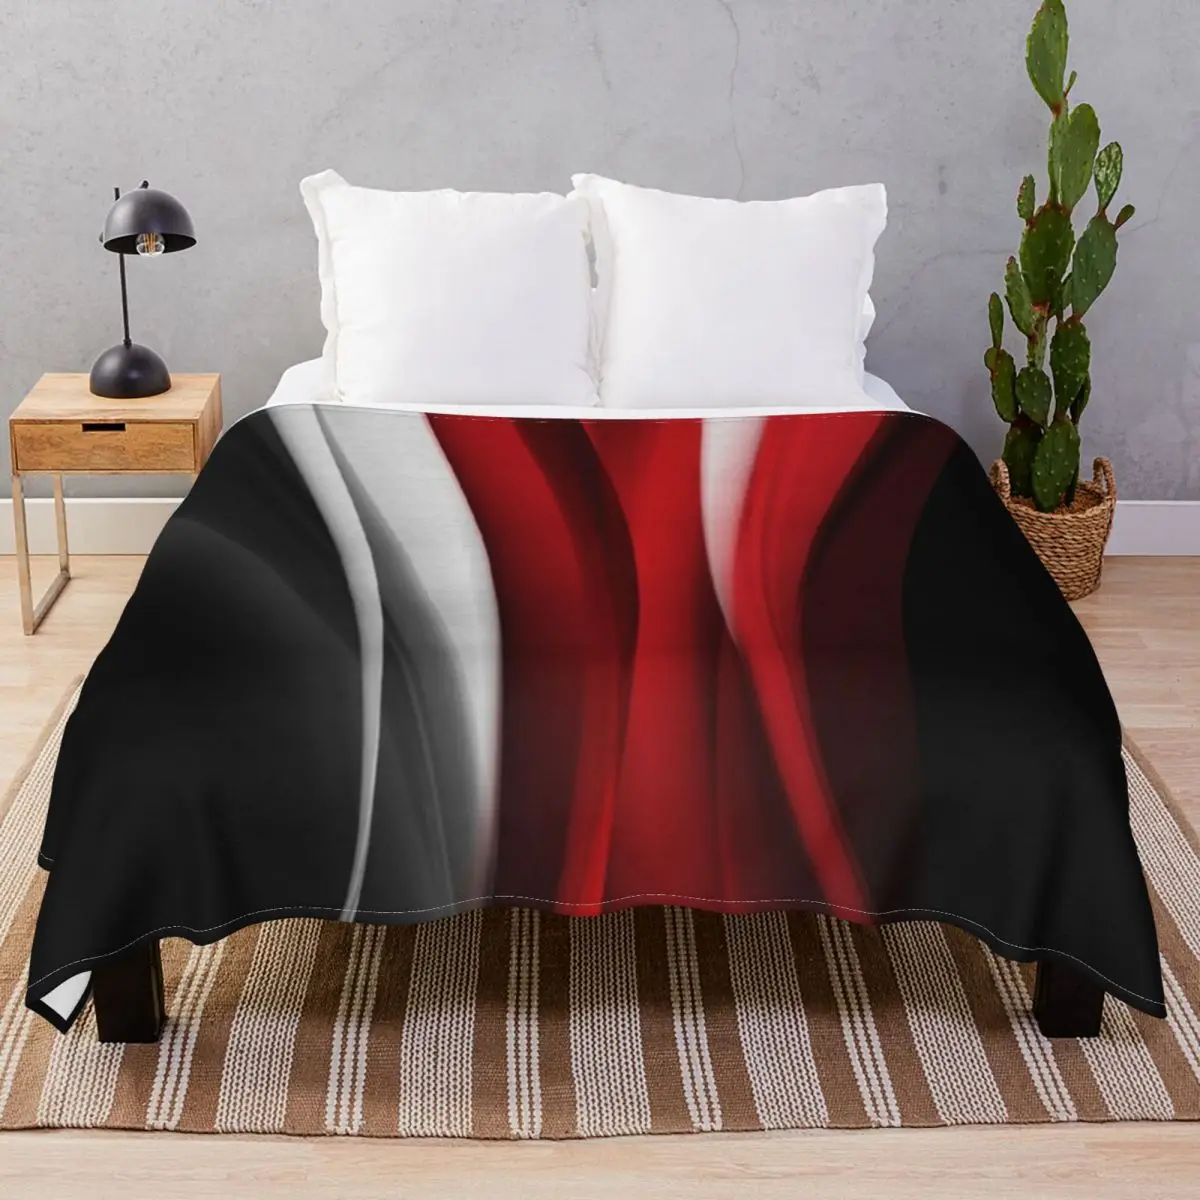 Red And White Blankets Flannel Print Multifunction Throw Blanket for Bed Home Couch Travel Cinema